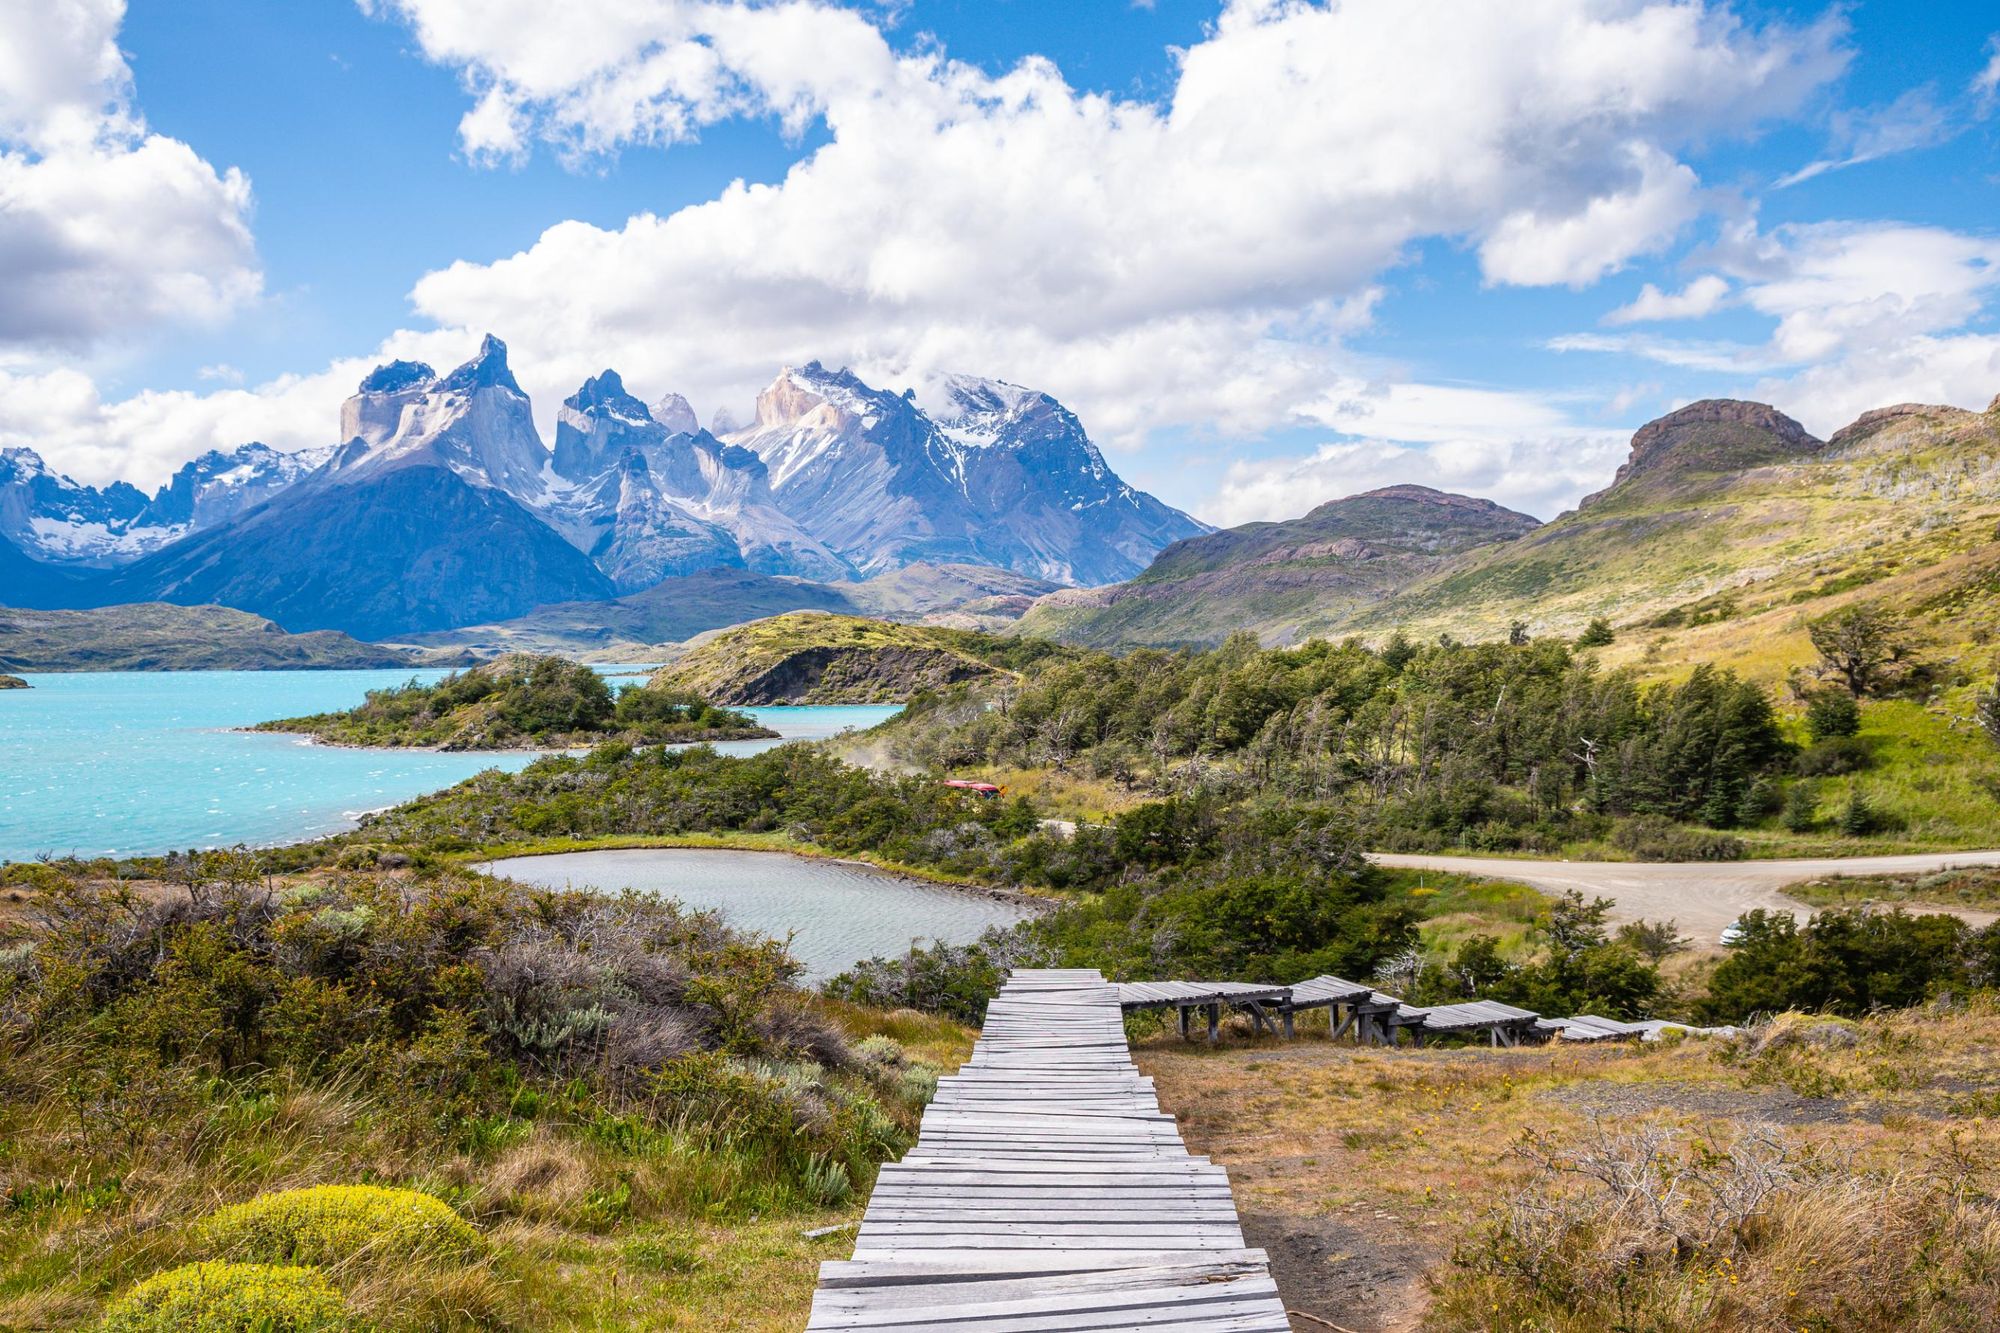 A Guide to the W Trek in Torres del Paine, Chile